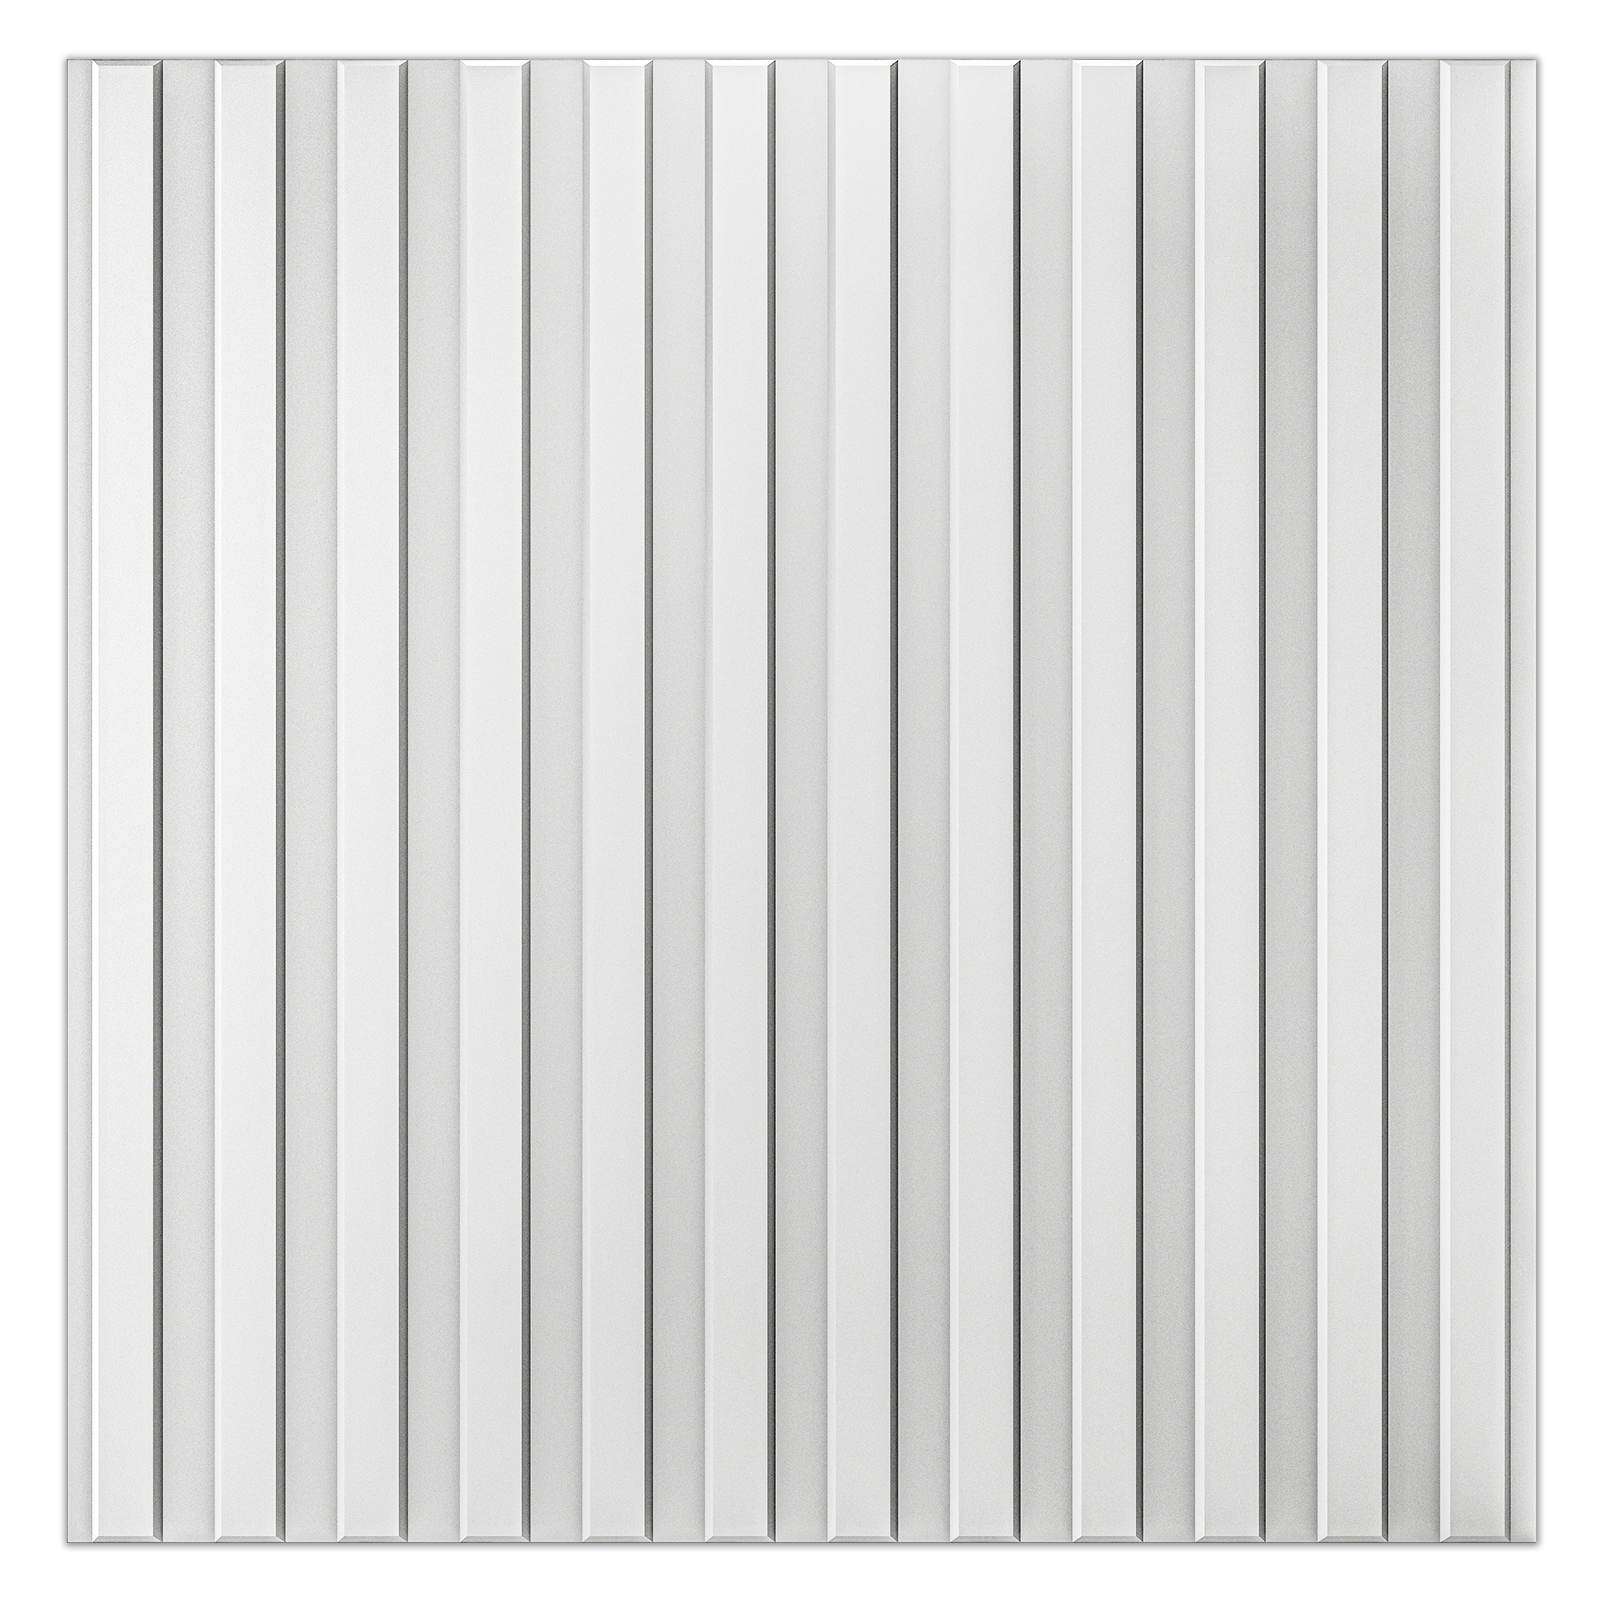 A10064-Art3d Slat Wall Panel, 3D Fluted Textured Panel 12-Tile 19.7 x 19.7in.